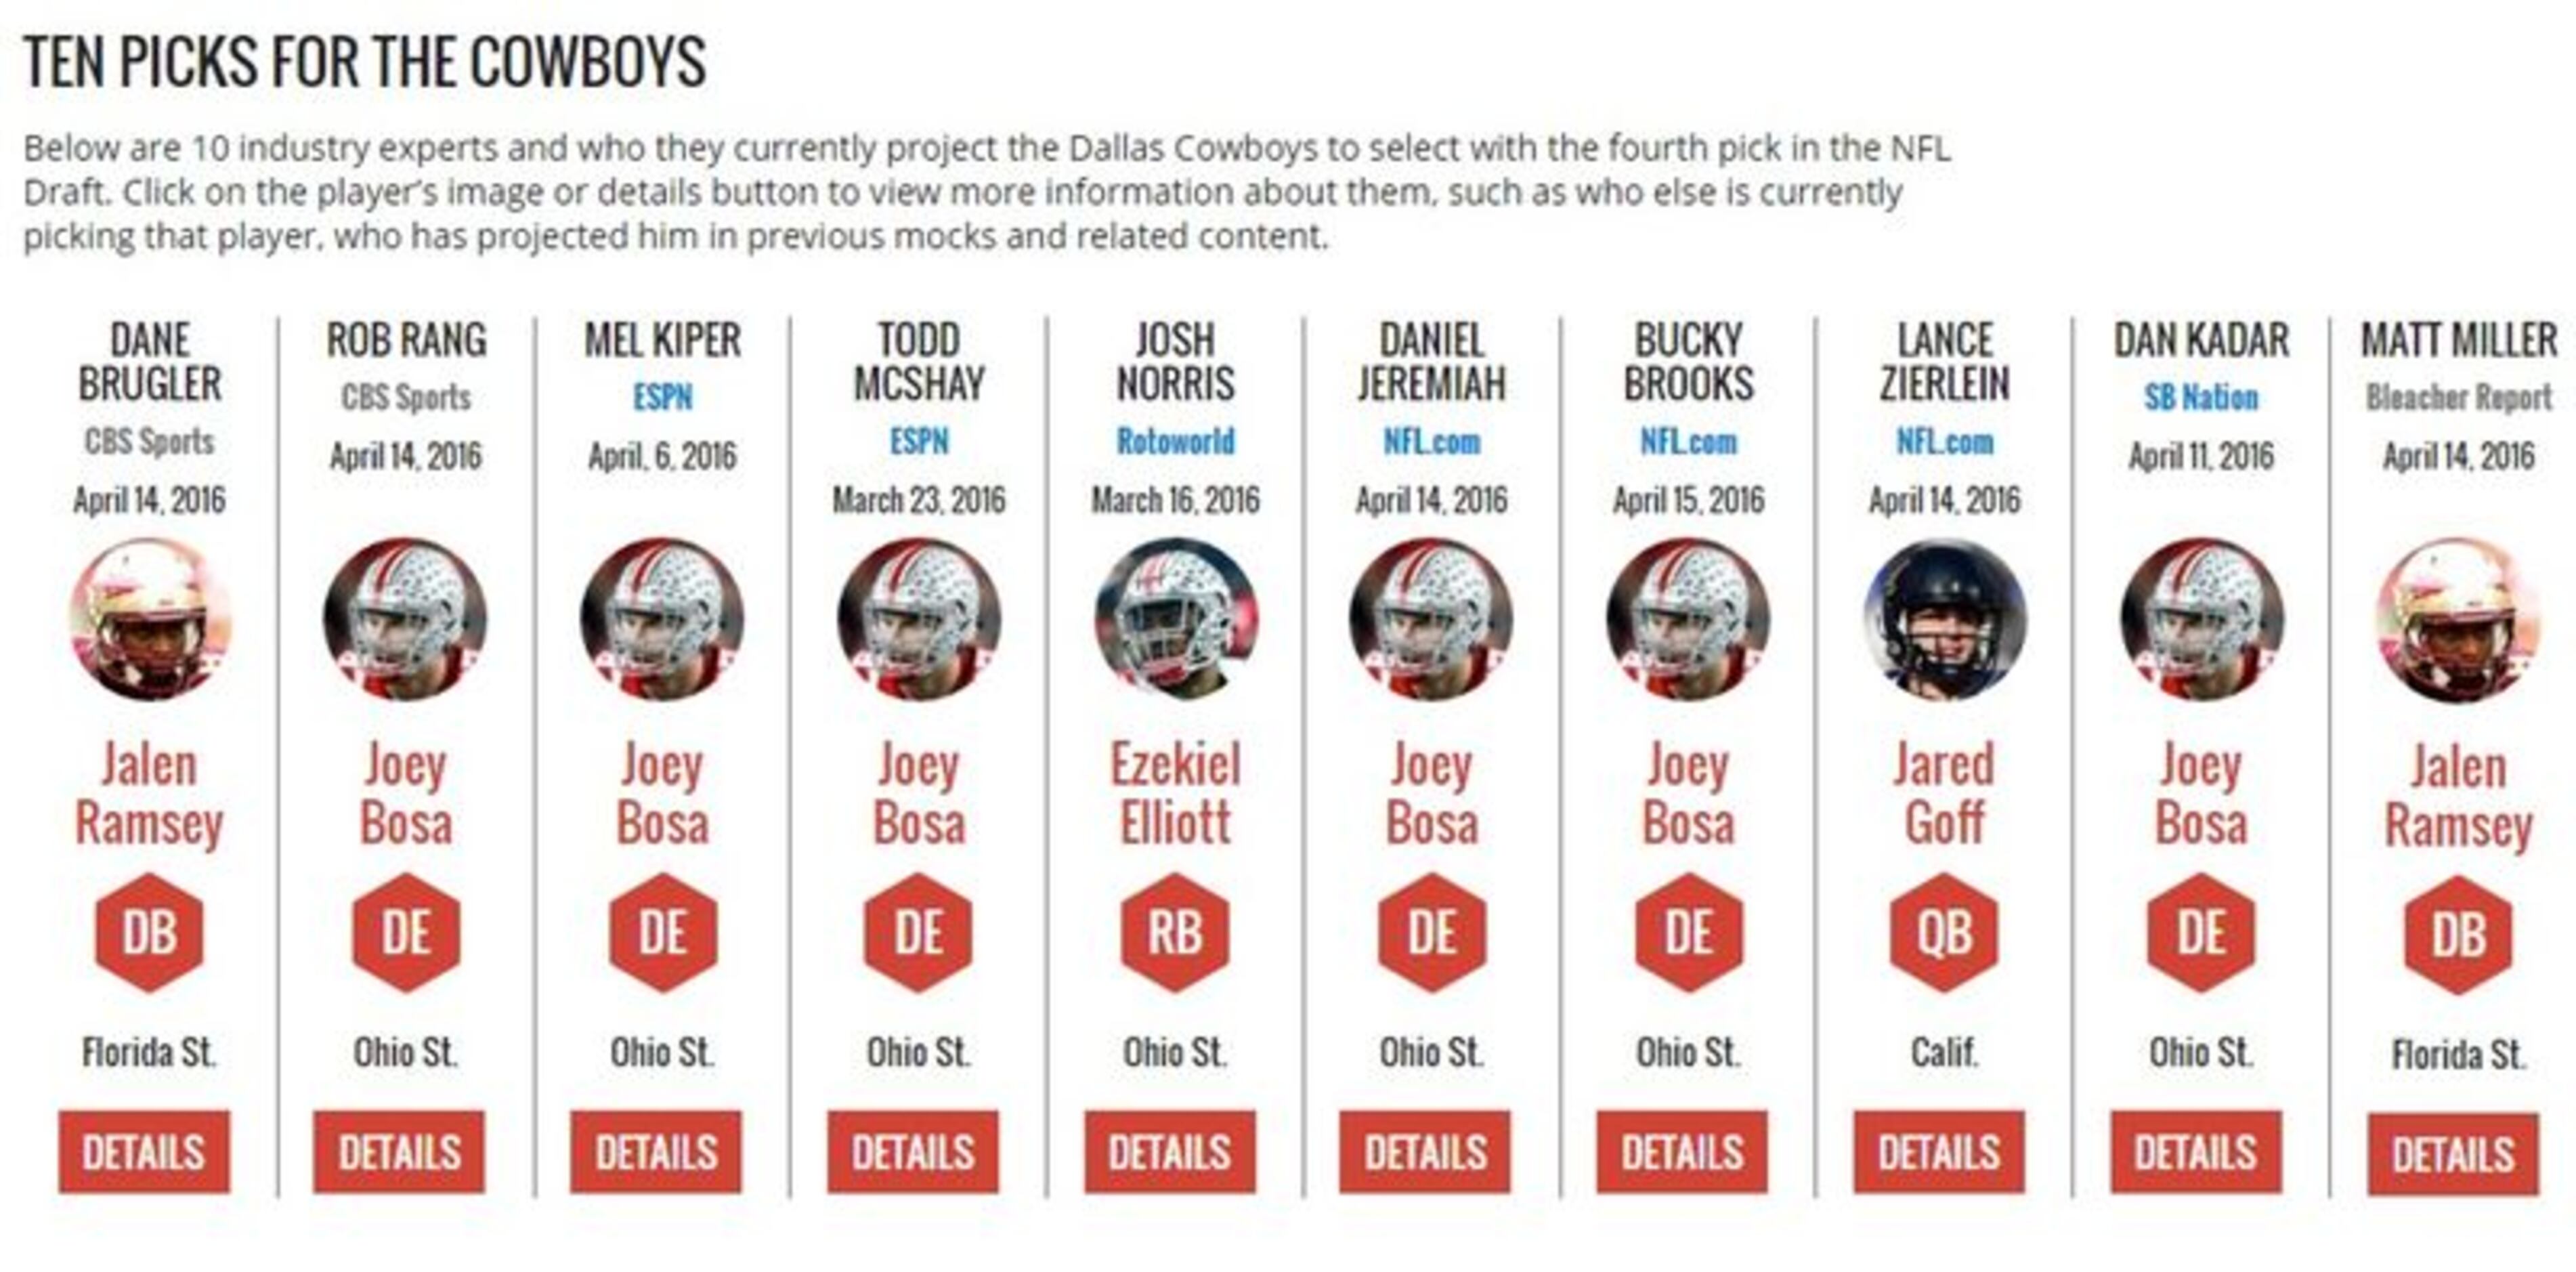 Final mock draft roundup: See which experts changed their Cowboys picks in  the eleventh hour